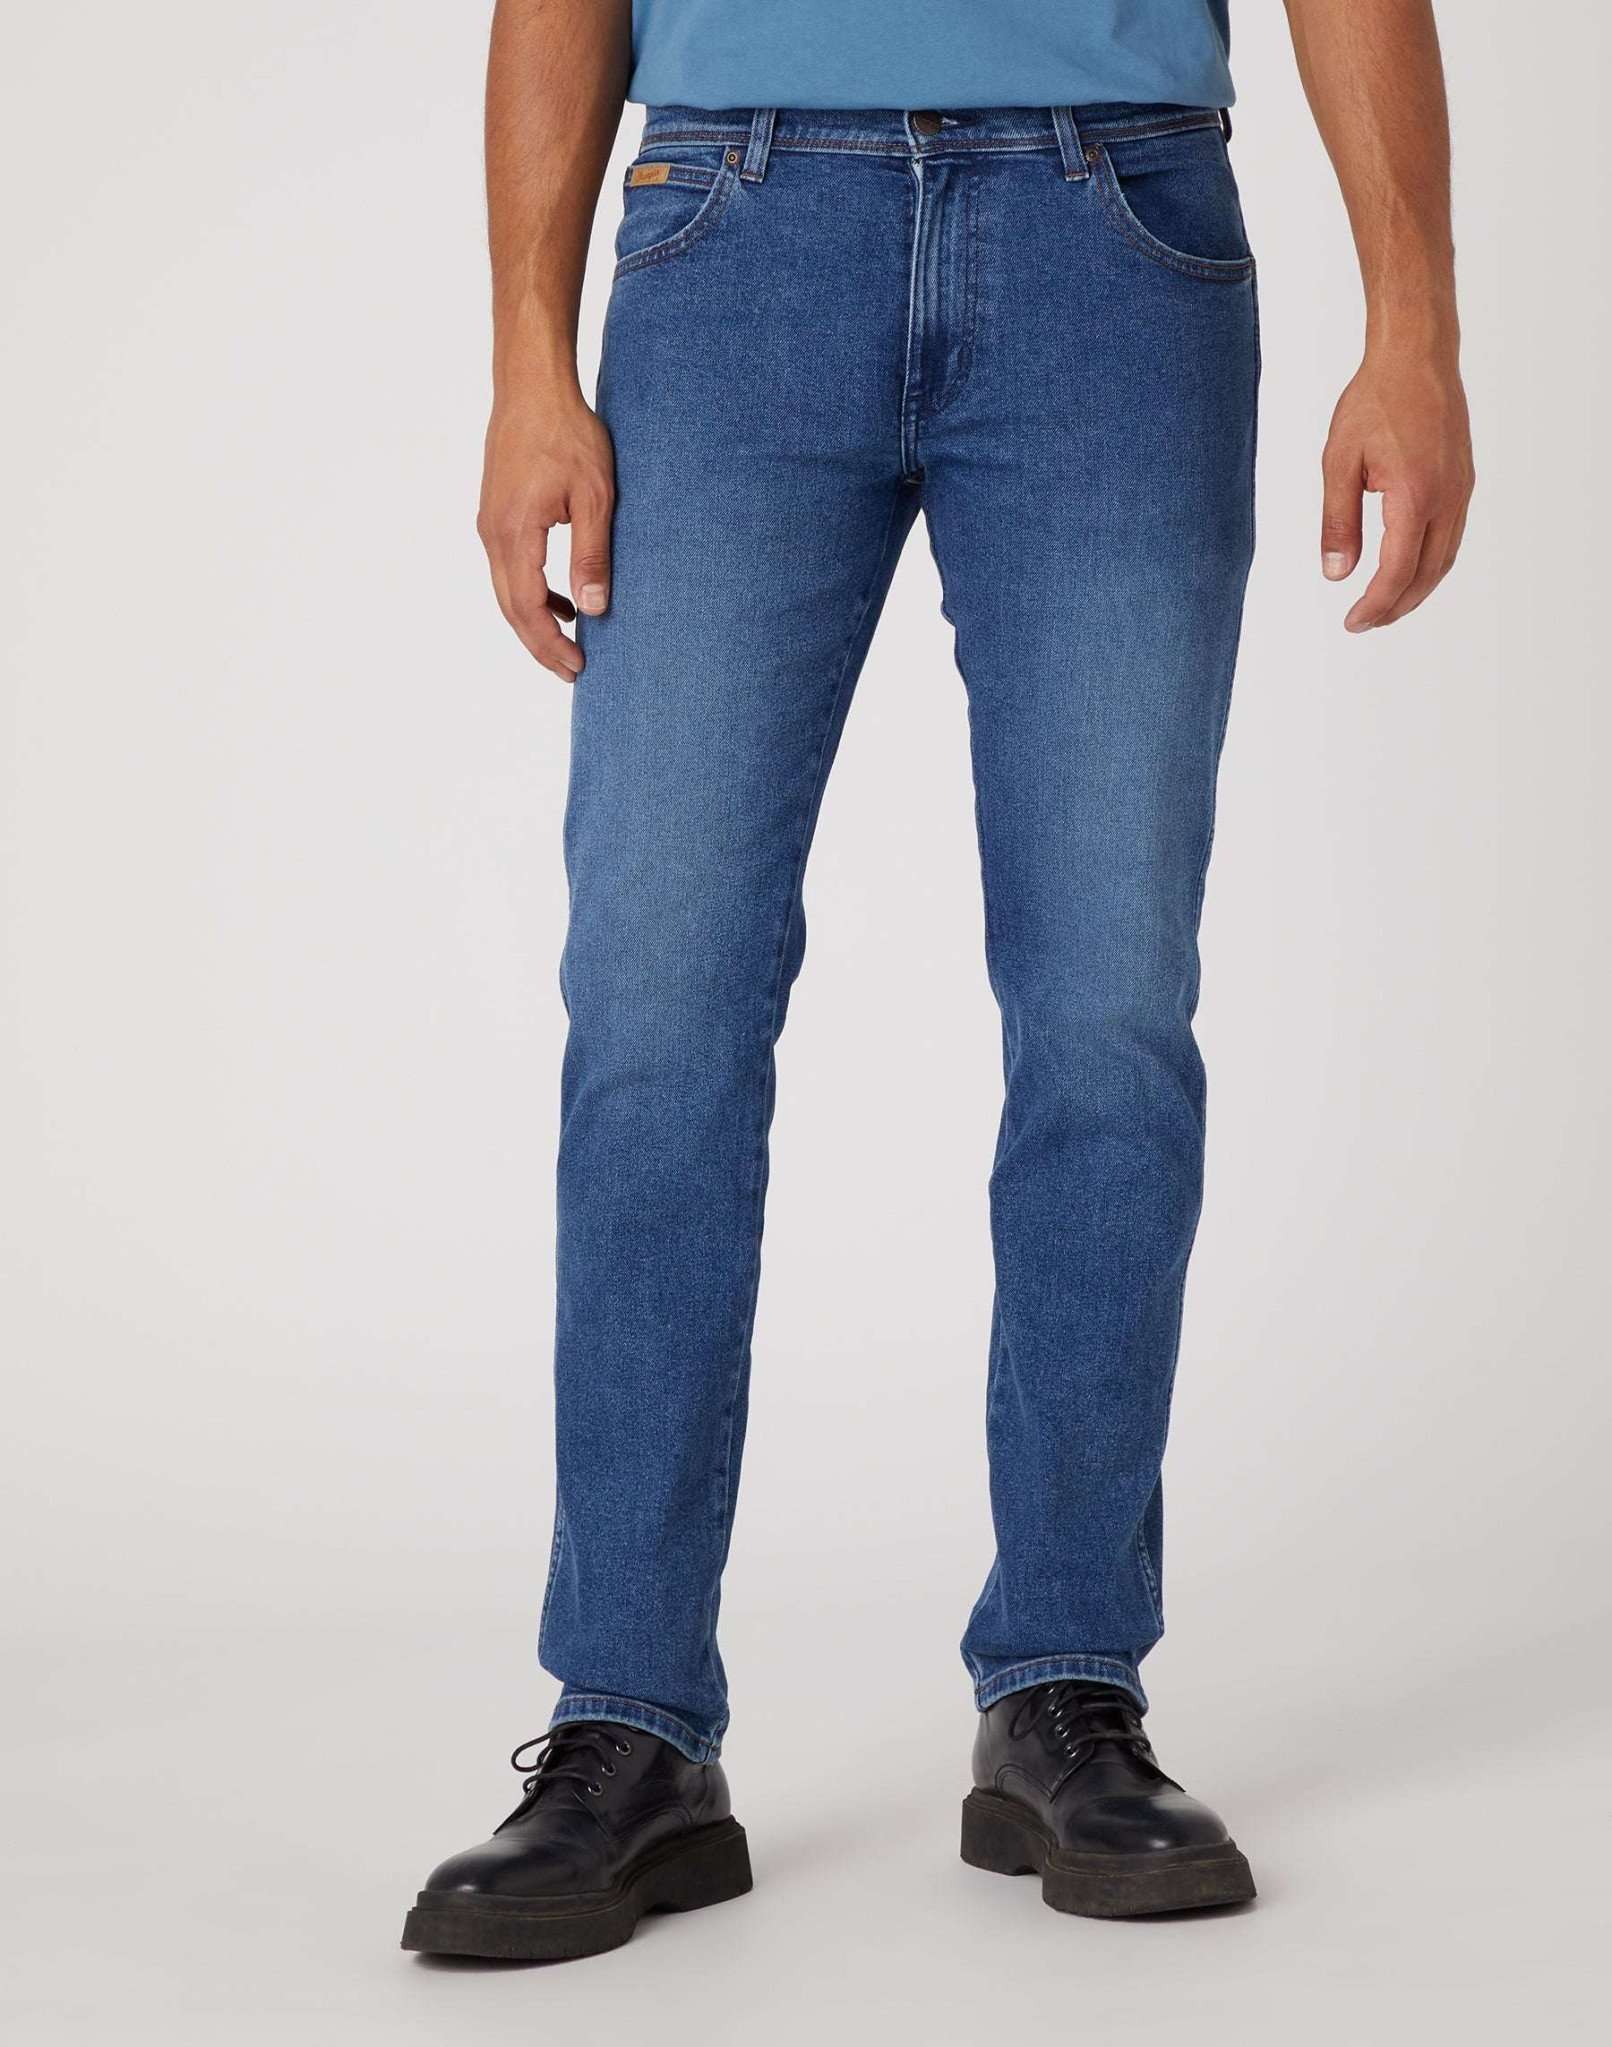 Texas Slim Low Stretch in Cool Shade Jeans Wrangler   